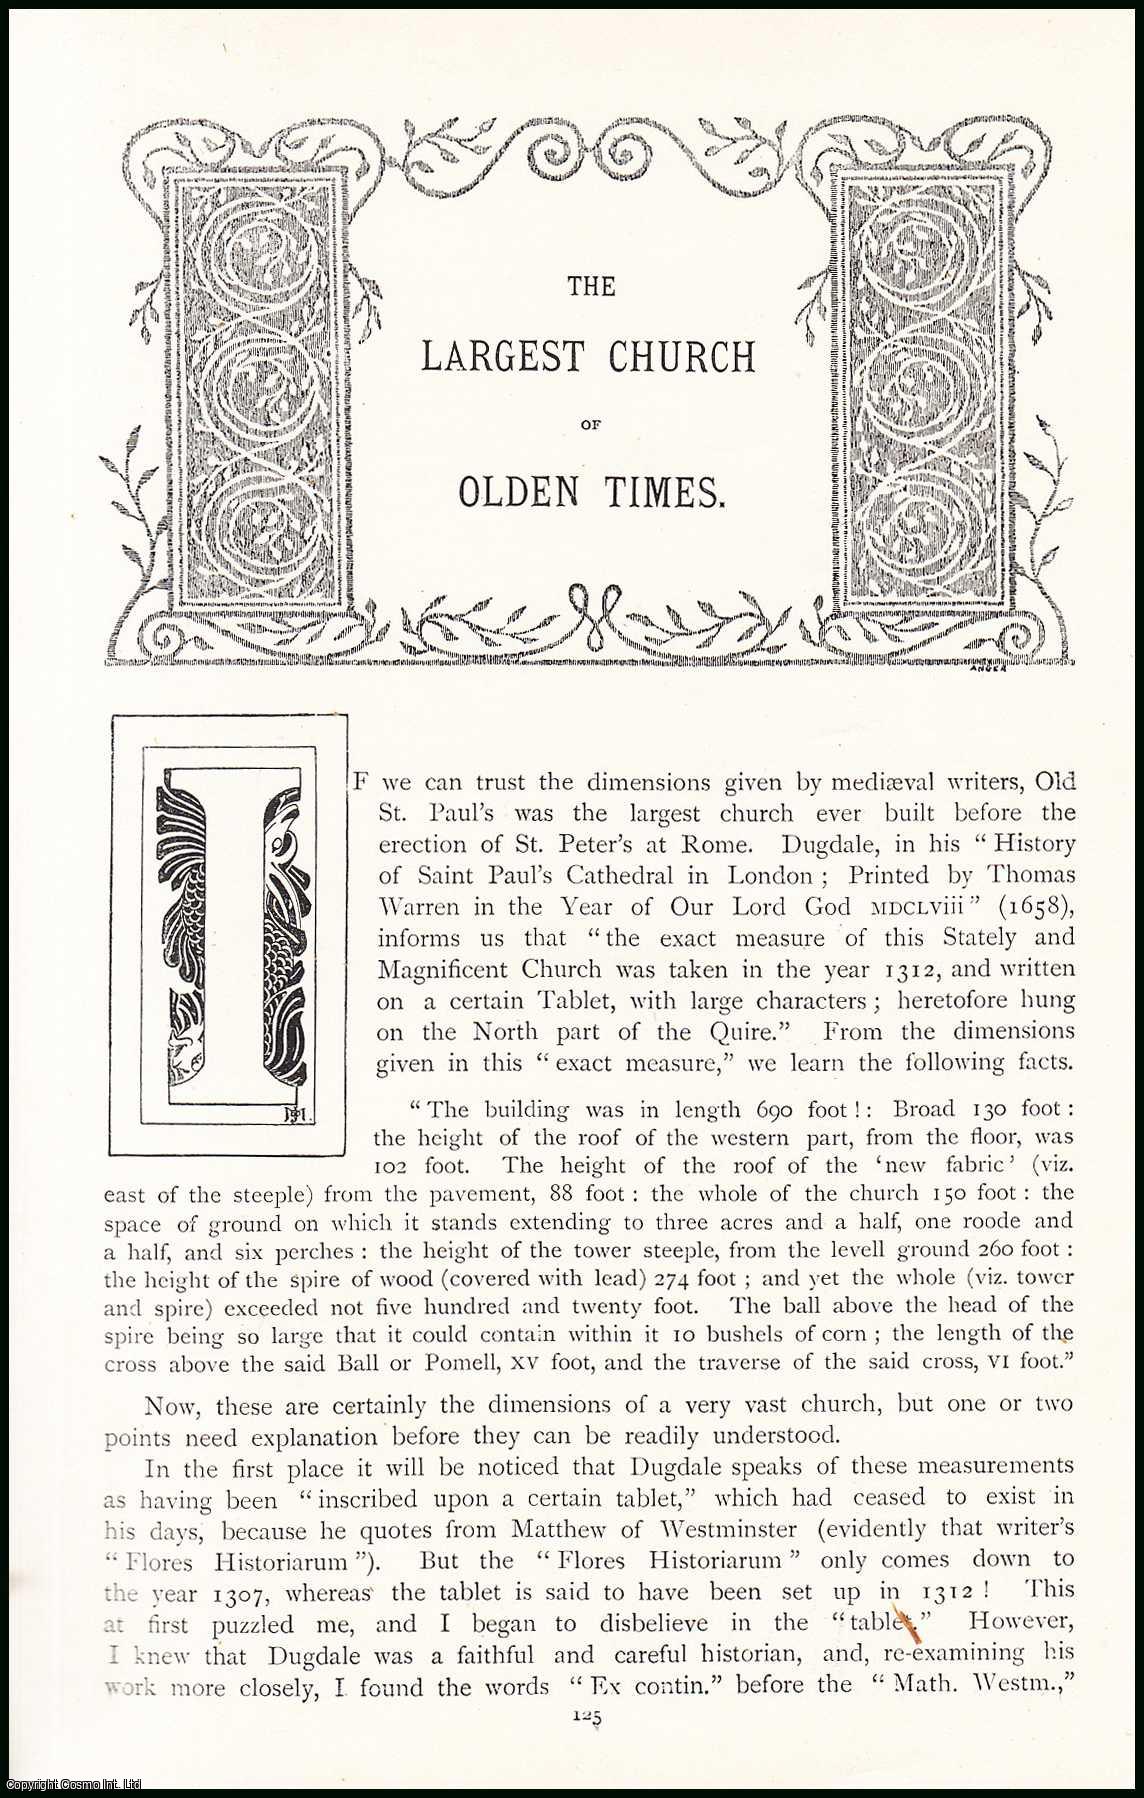 H.W. Brewer - Saint Paul's Church, London : the largest church of olden times. An uncommon original article from the Pall Mall Magazine, 1898.